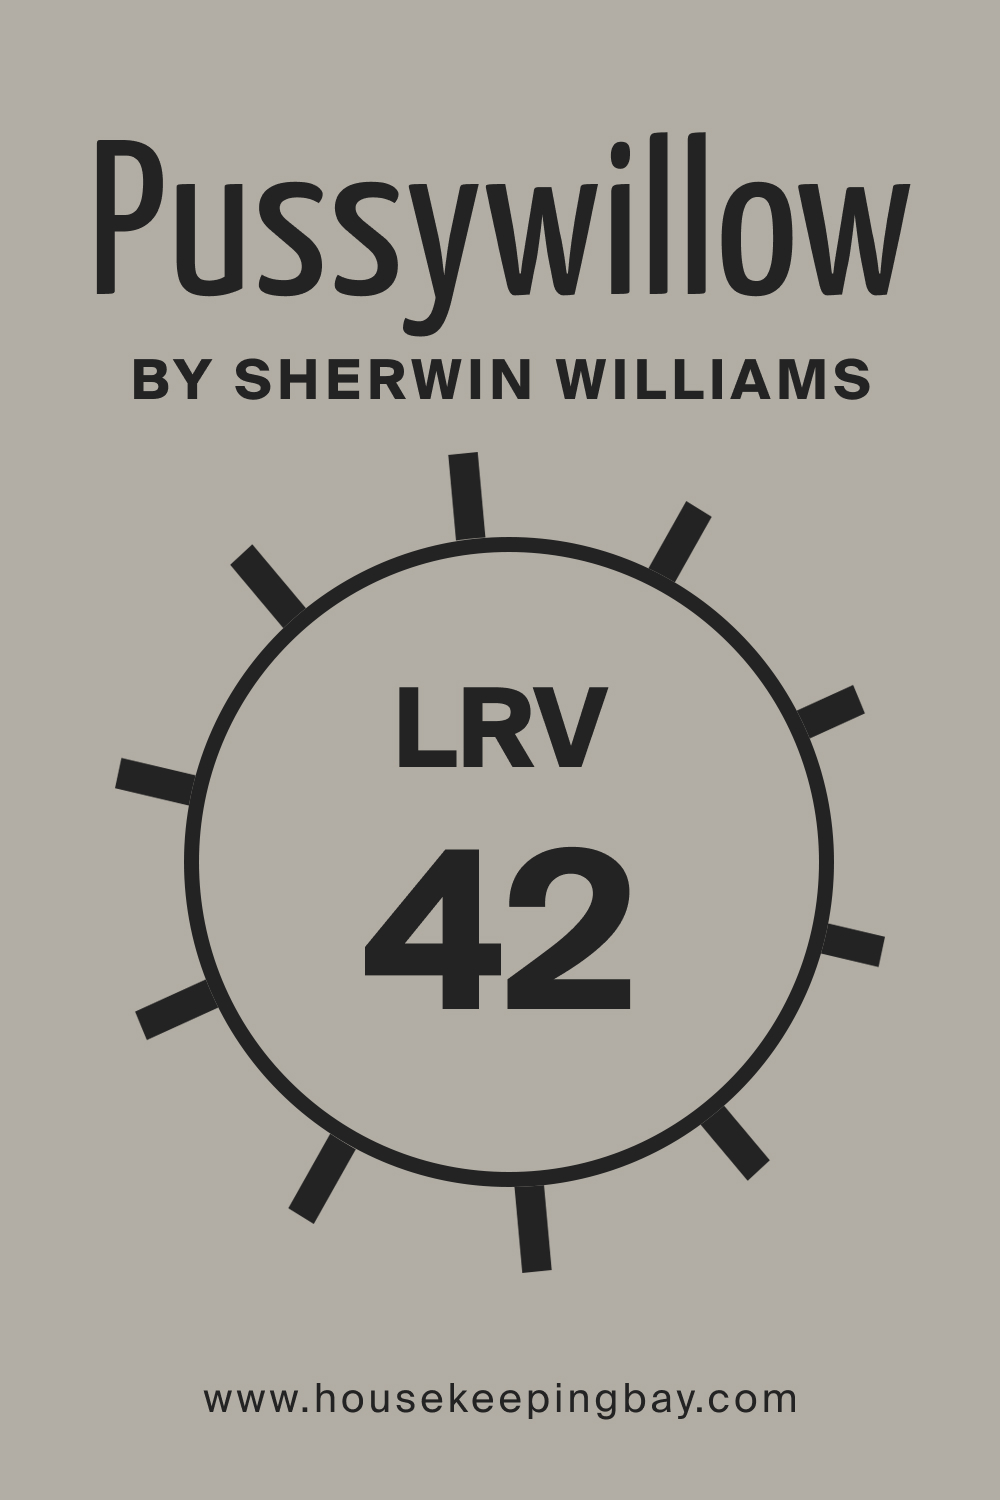 Pussywillow SW 7643 by Sherwin Williams. LRV – 42